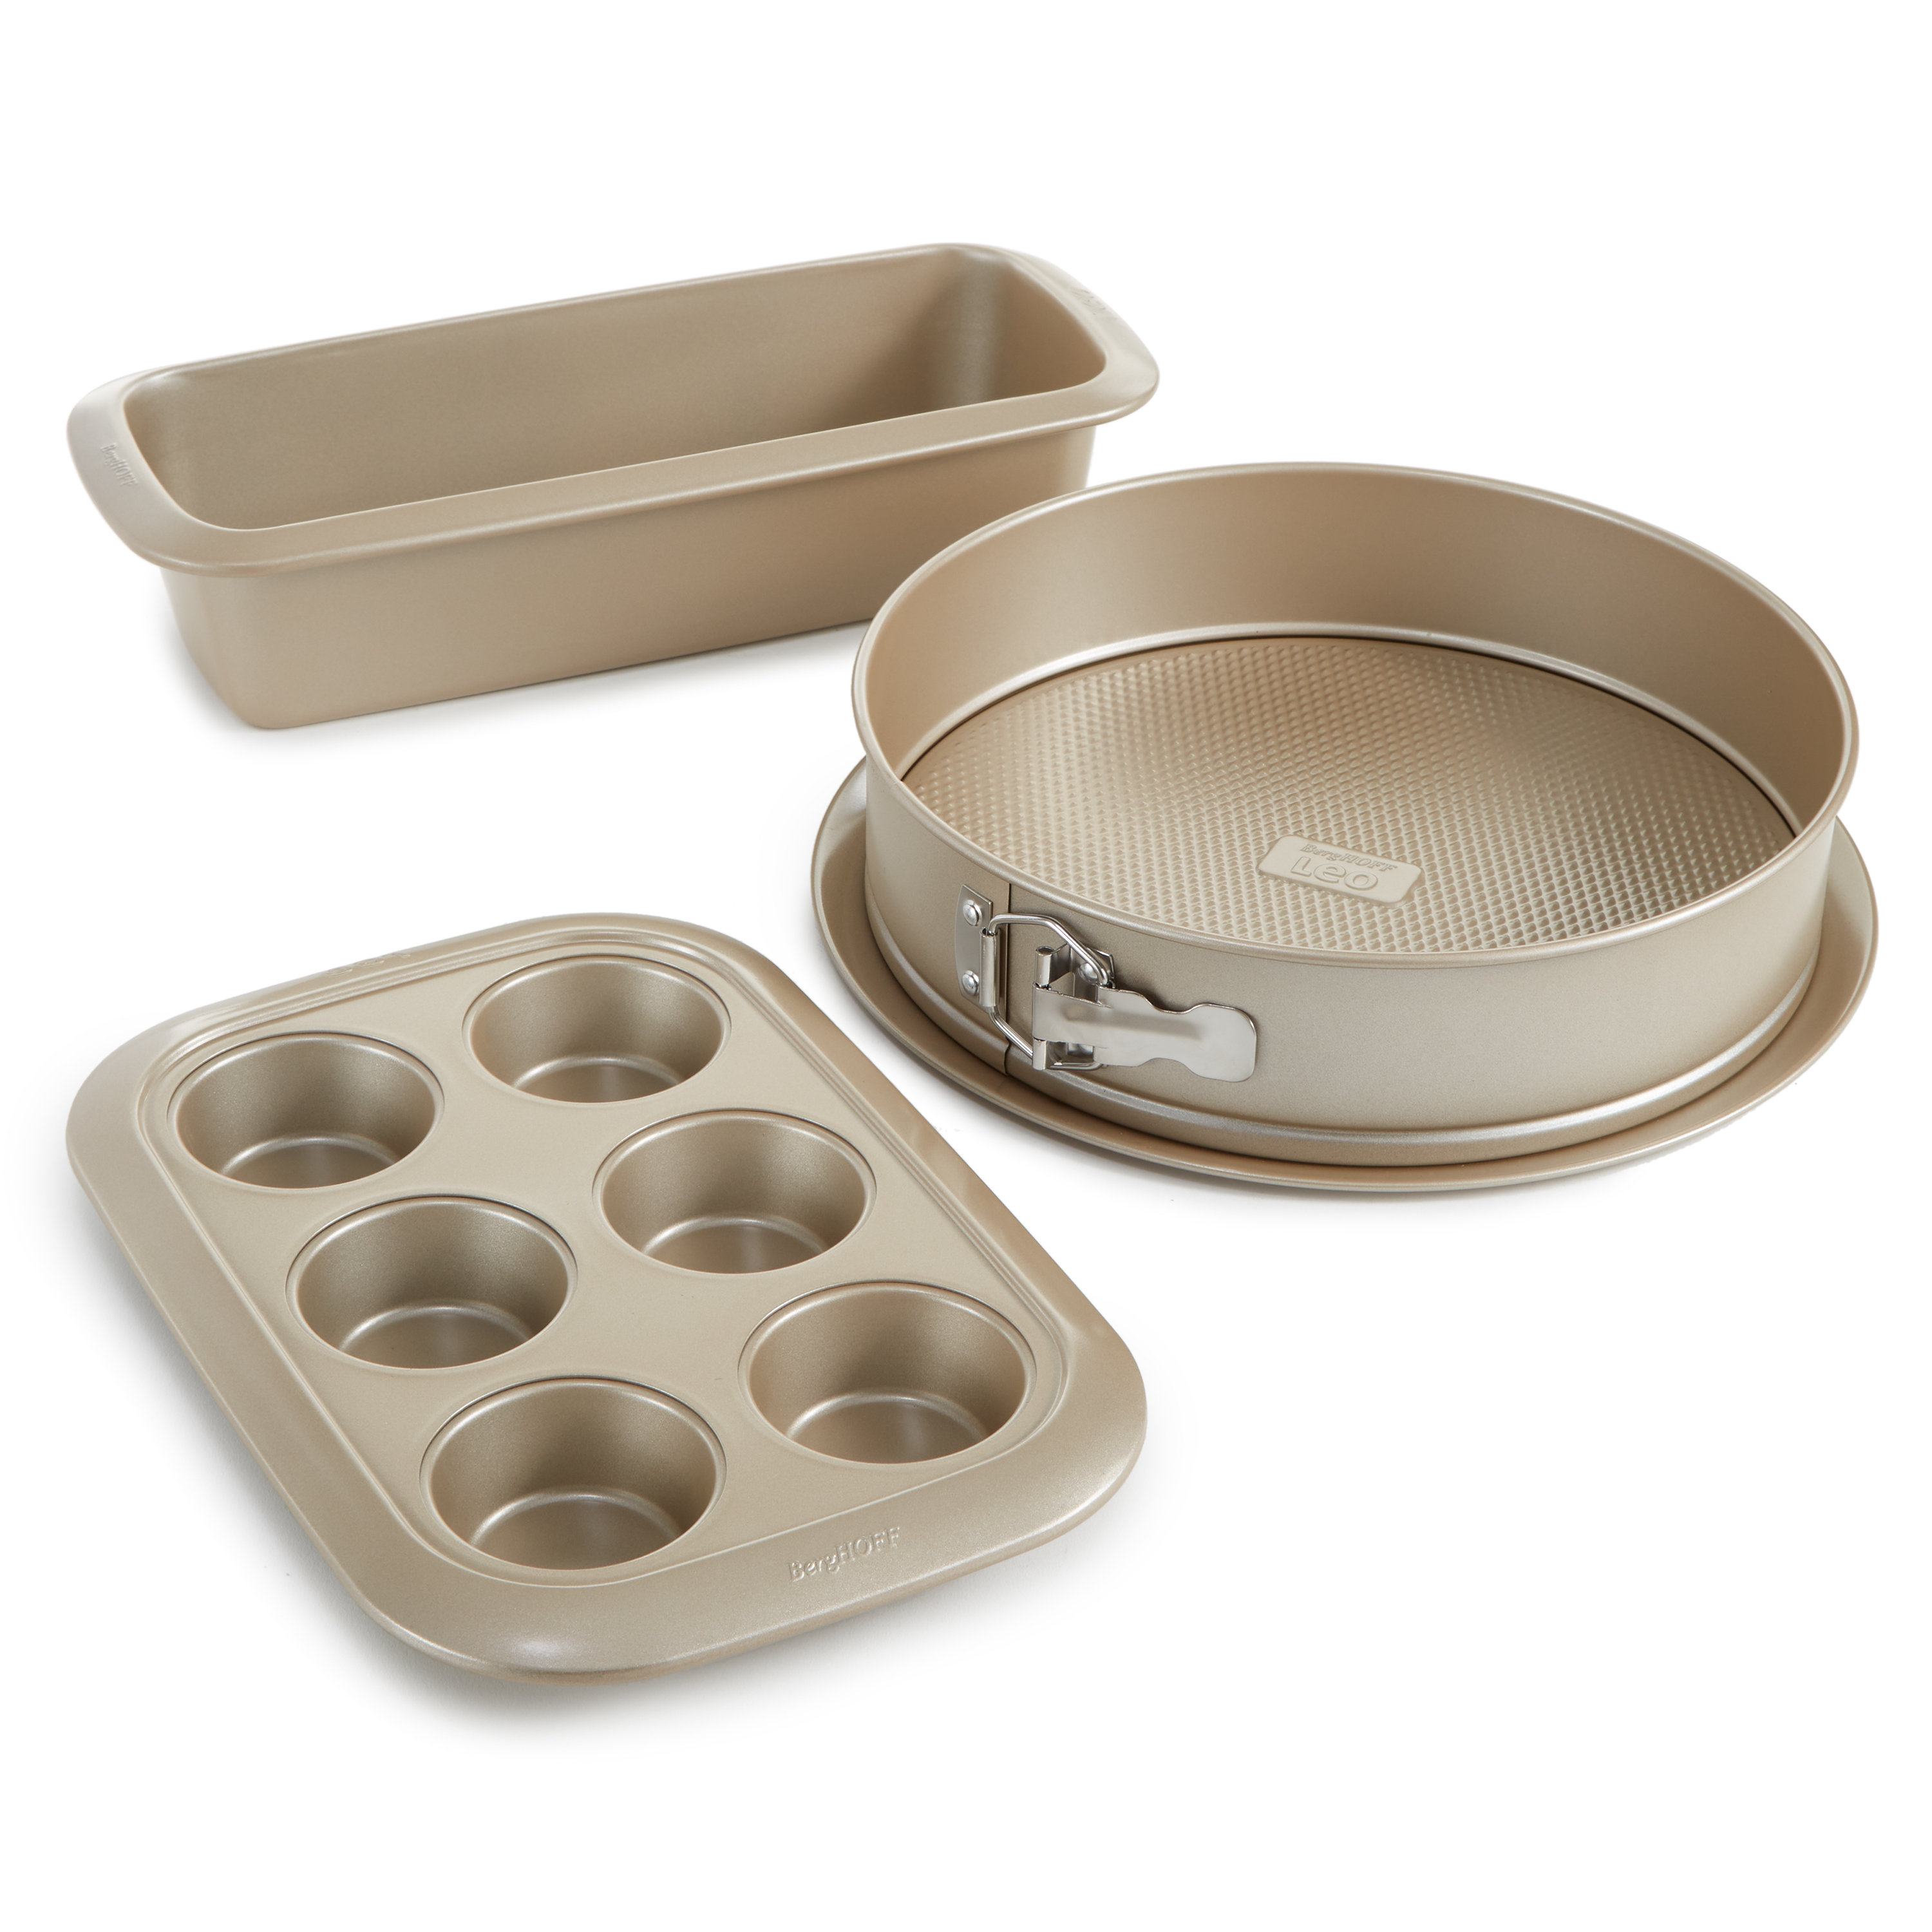 BergHOFF Balance Non-Stick Carbon Steel 12-Cup Muffin Pan 3.25